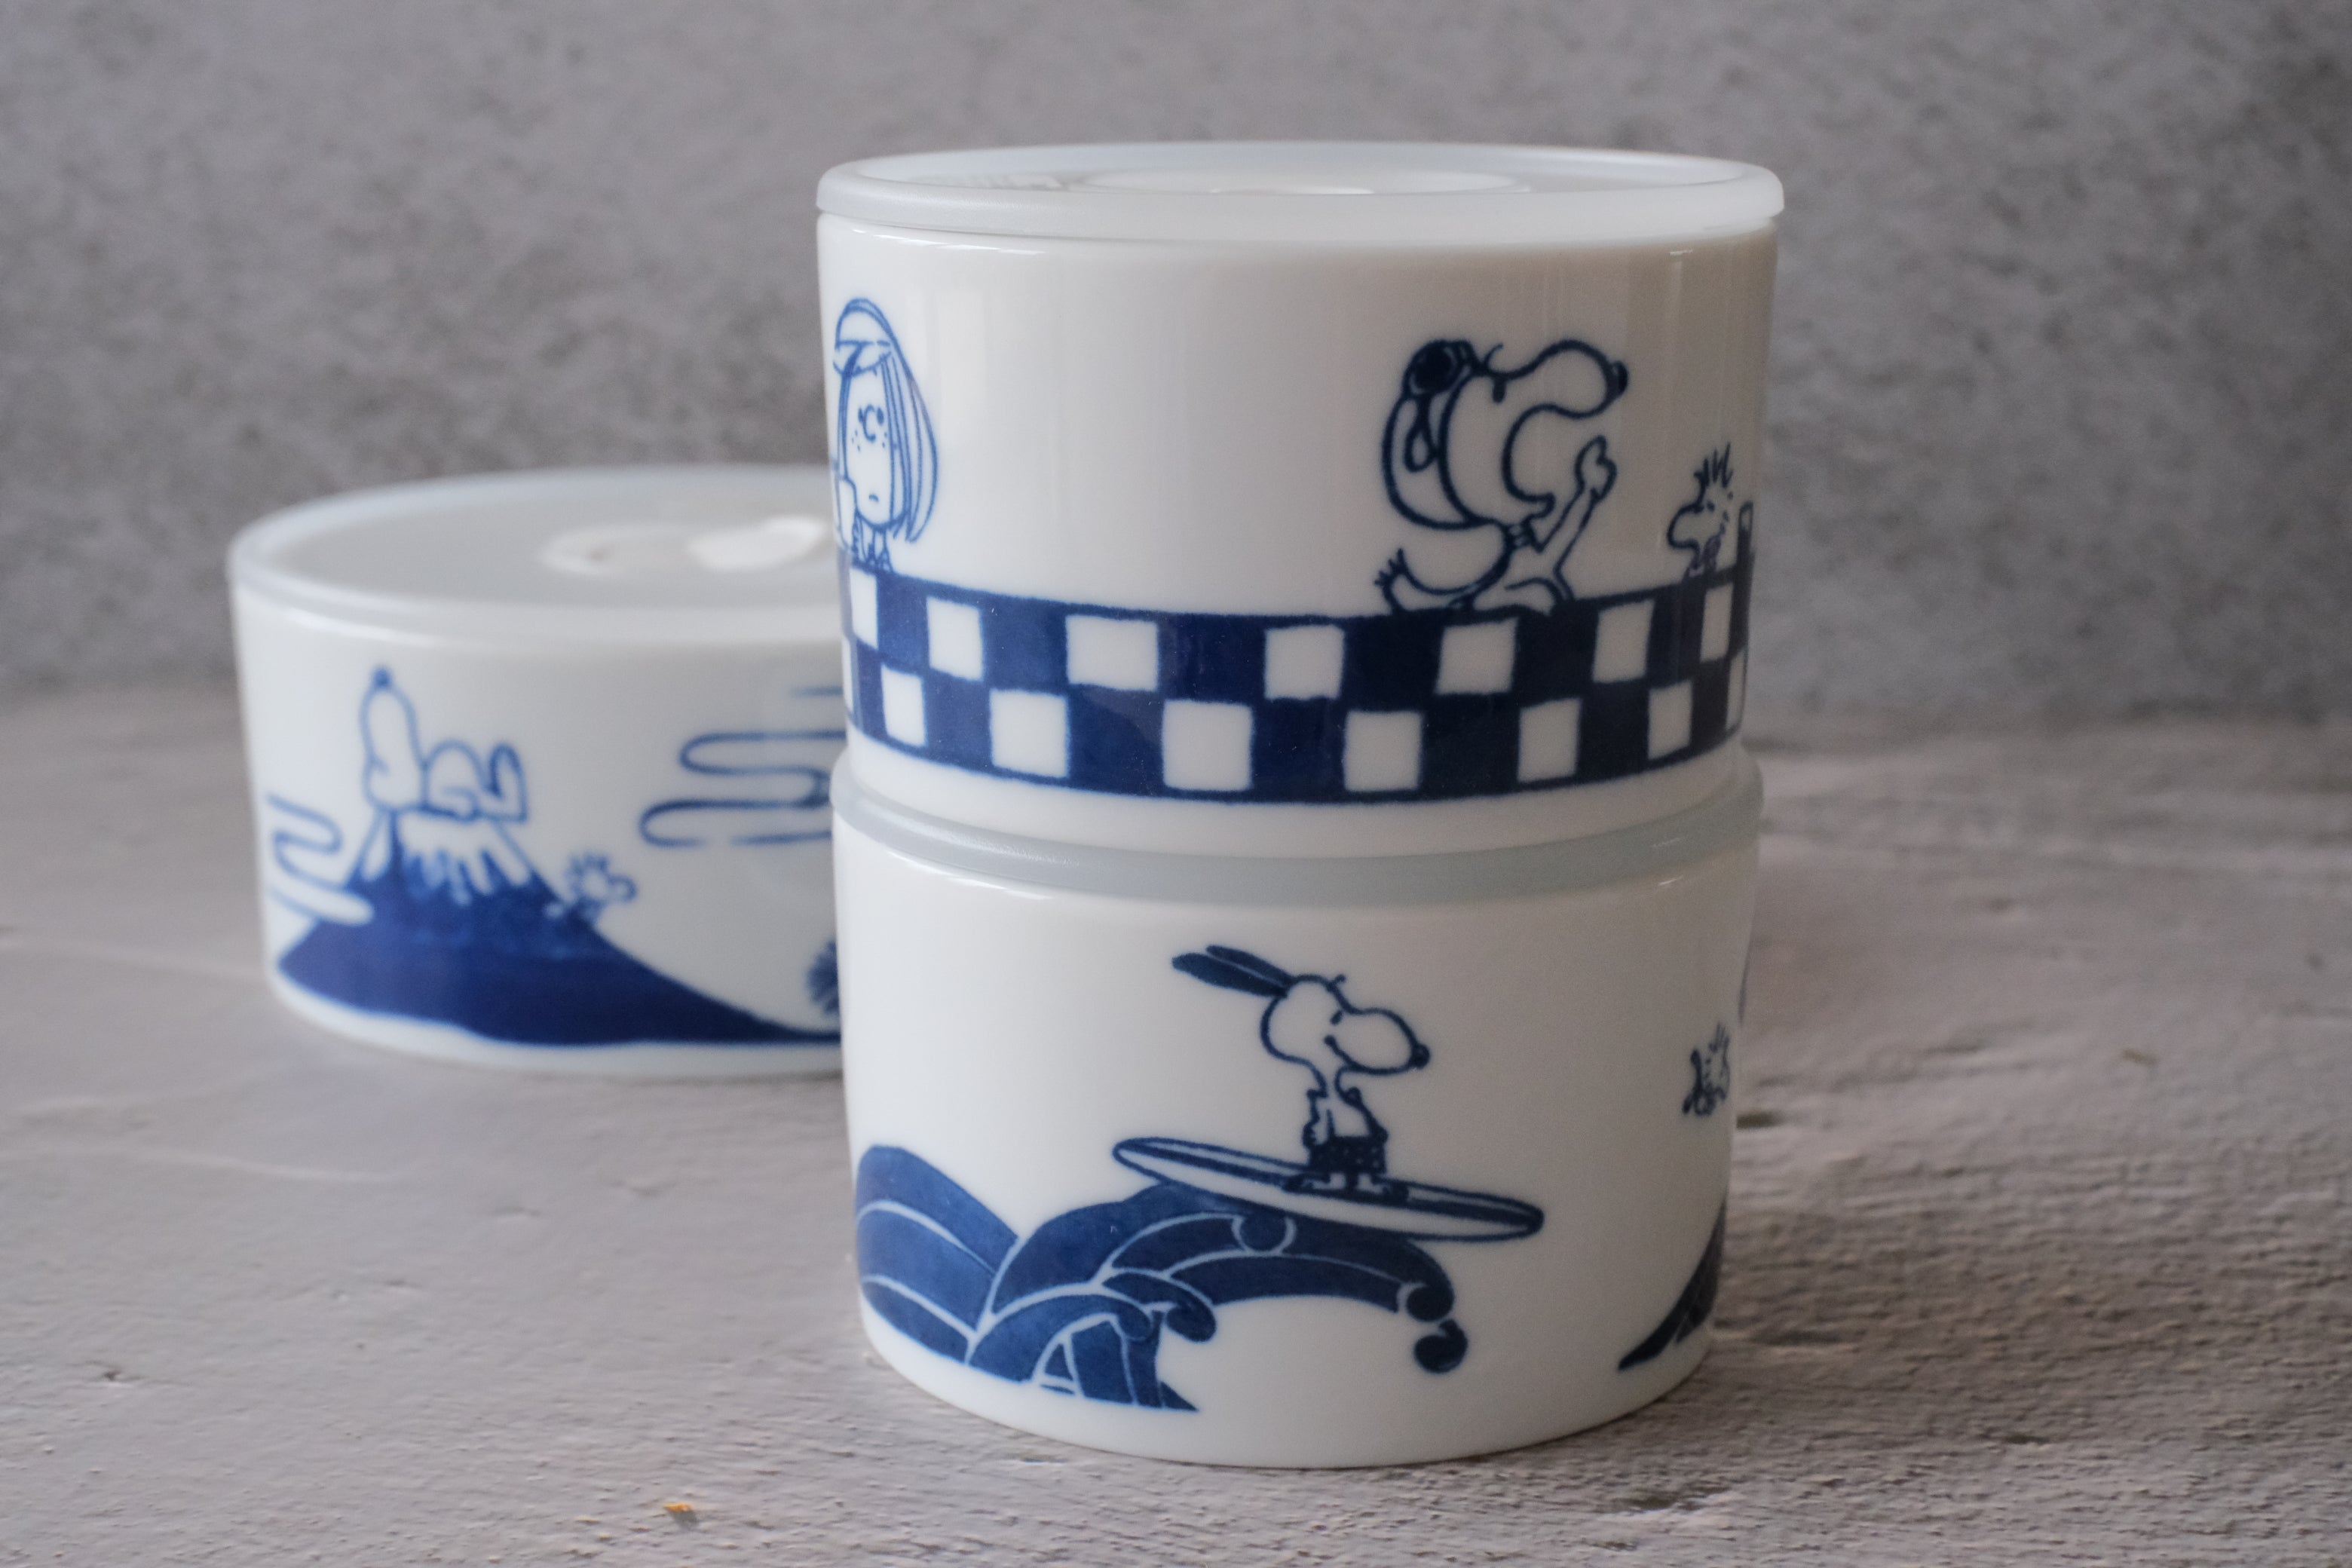  SKATER JP Snoopy Mug Set of 3 with Strwas and Lids Straw Cups  11oz : Home & Kitchen